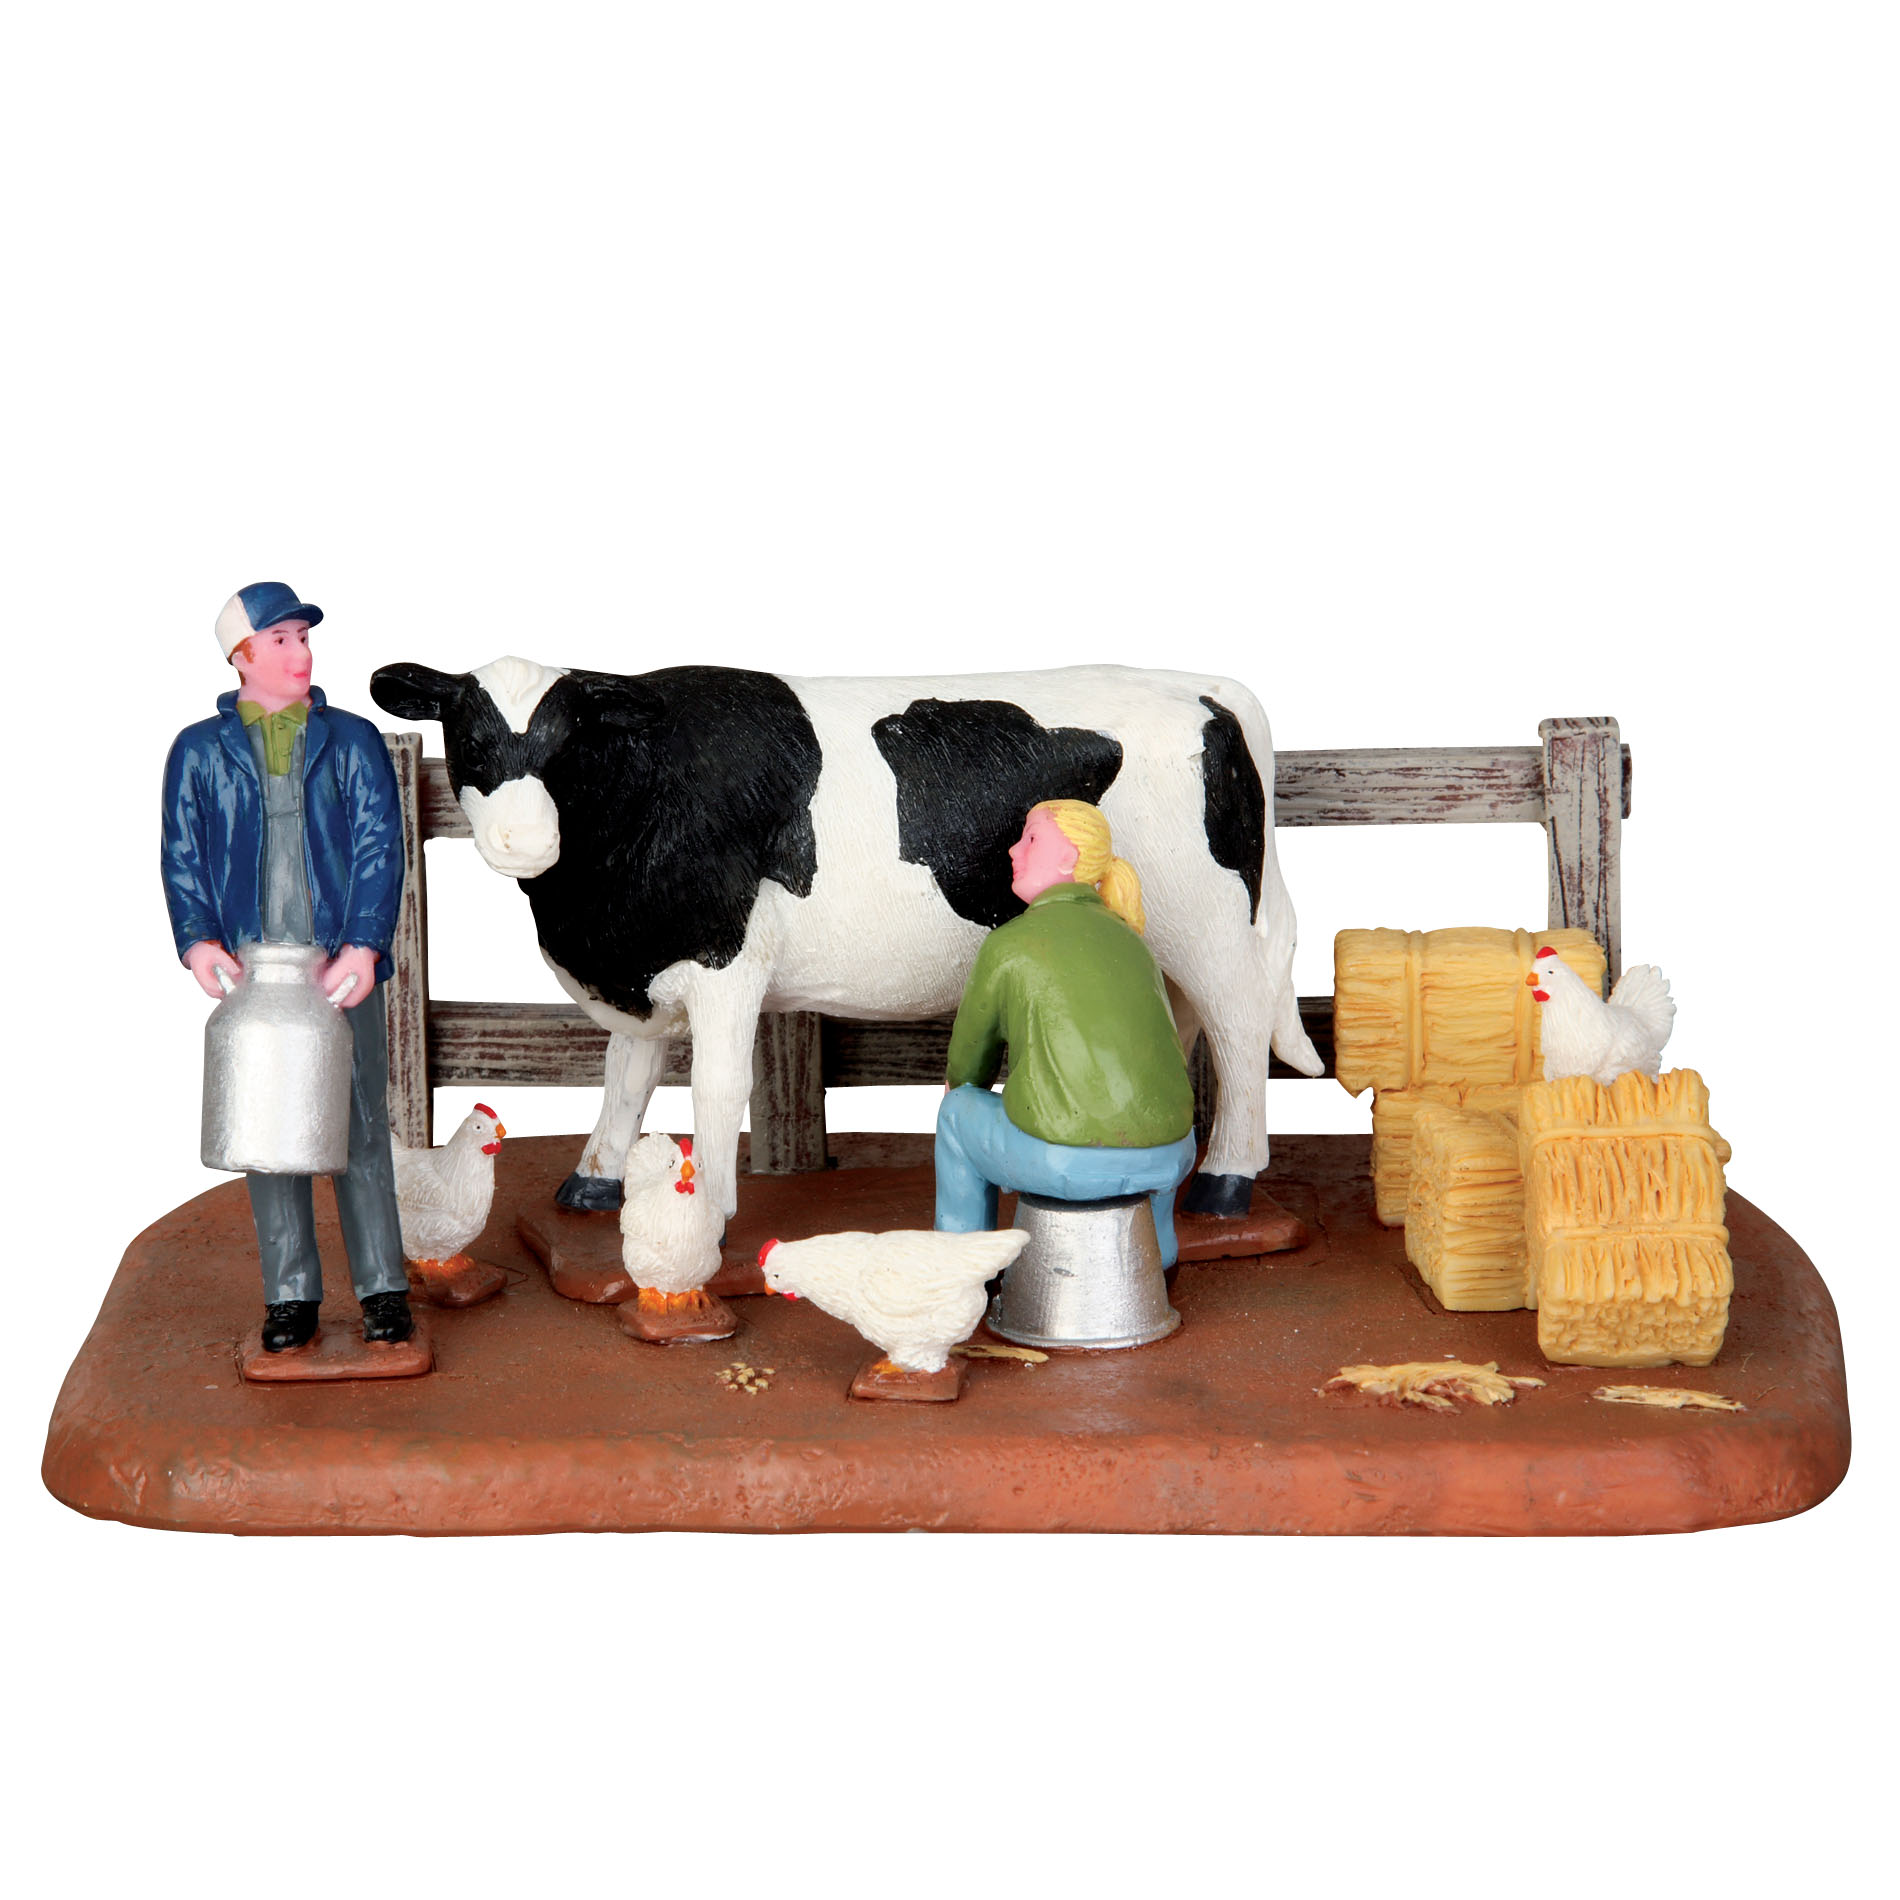 Lemax Village Collection Christmas Village Accessory, Morning Milk